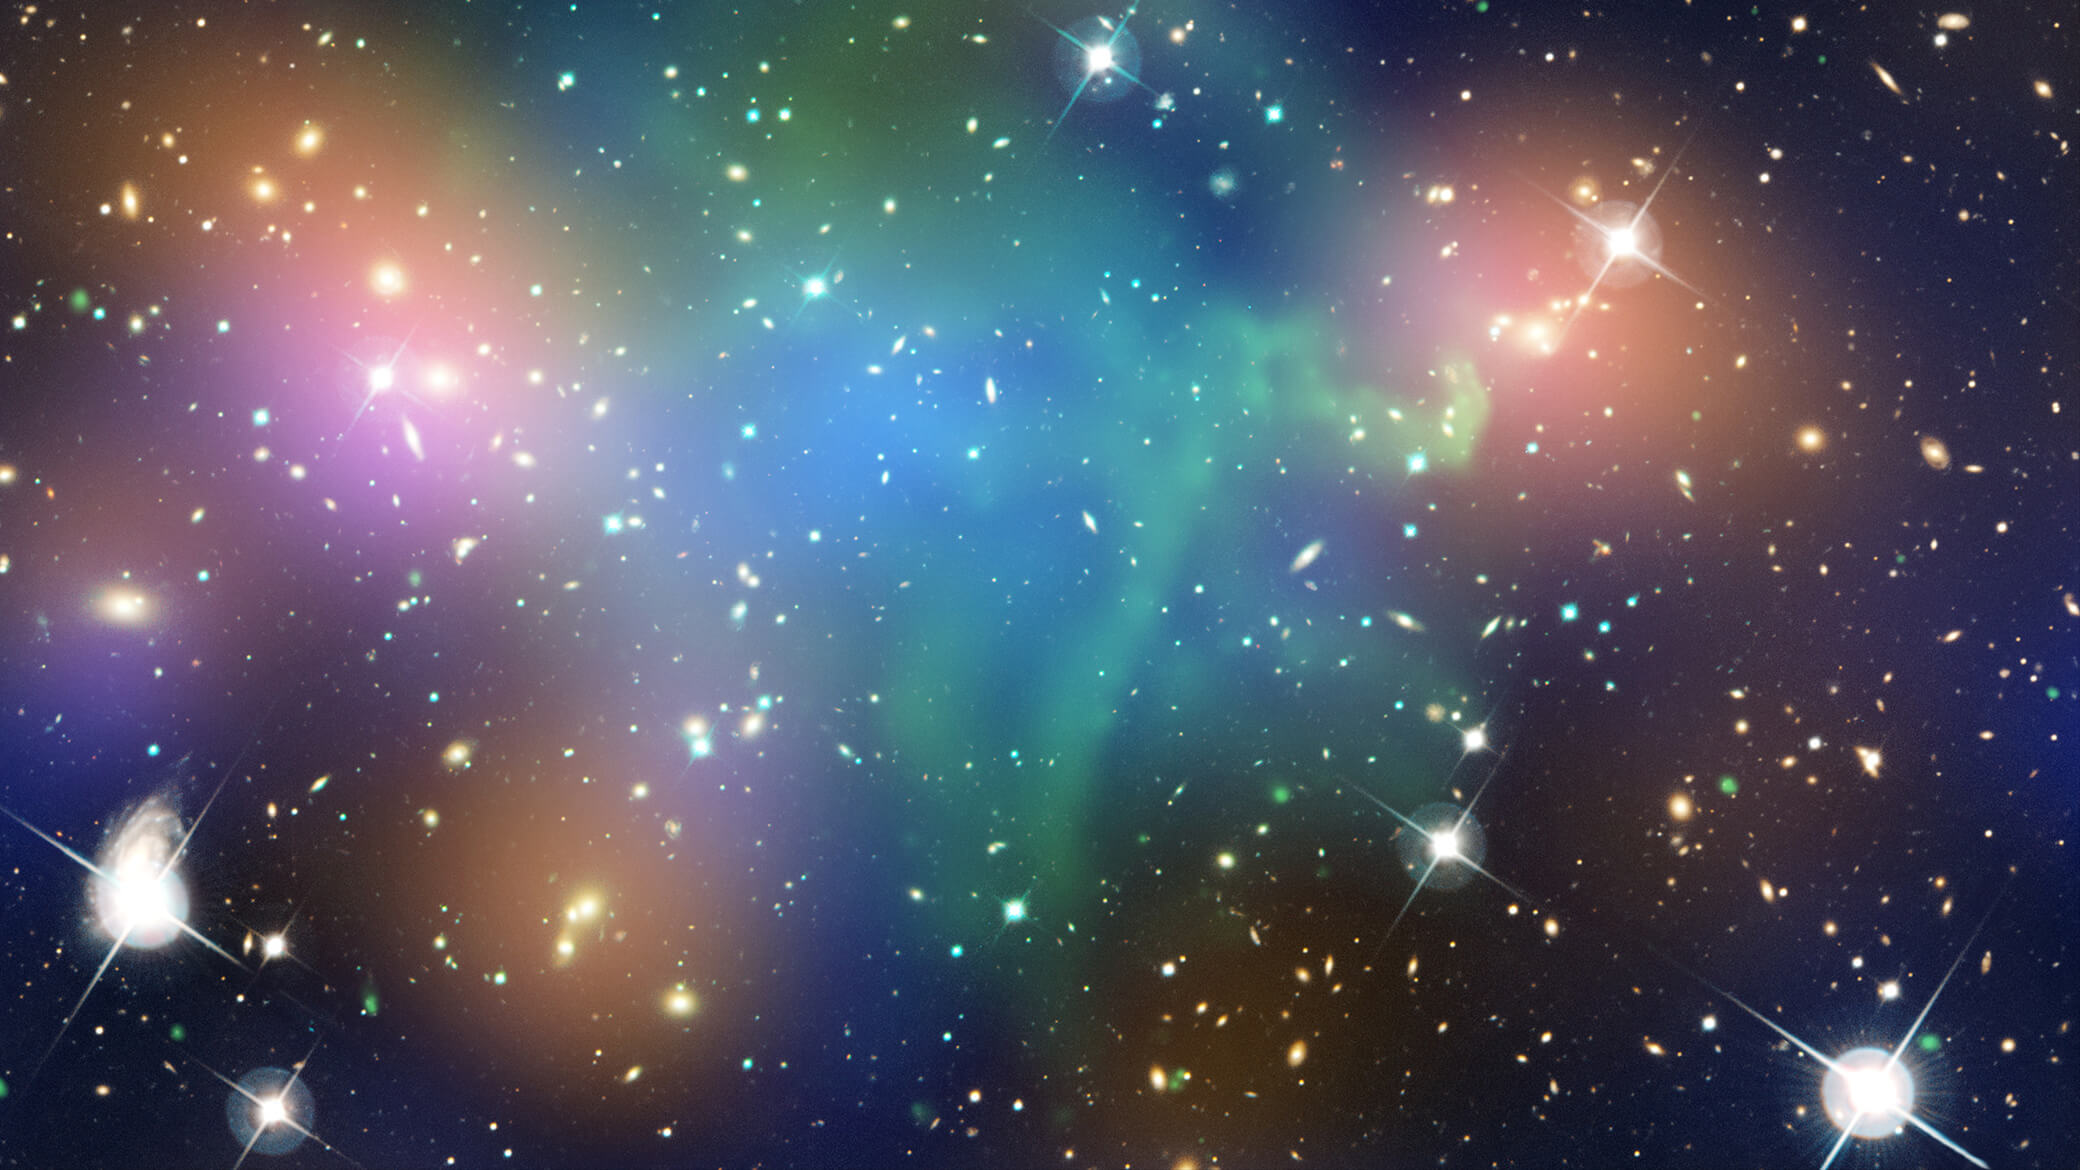 Abell 520. A collision of massive galaxy clusters located about 2.4 billion light years from Earth. 